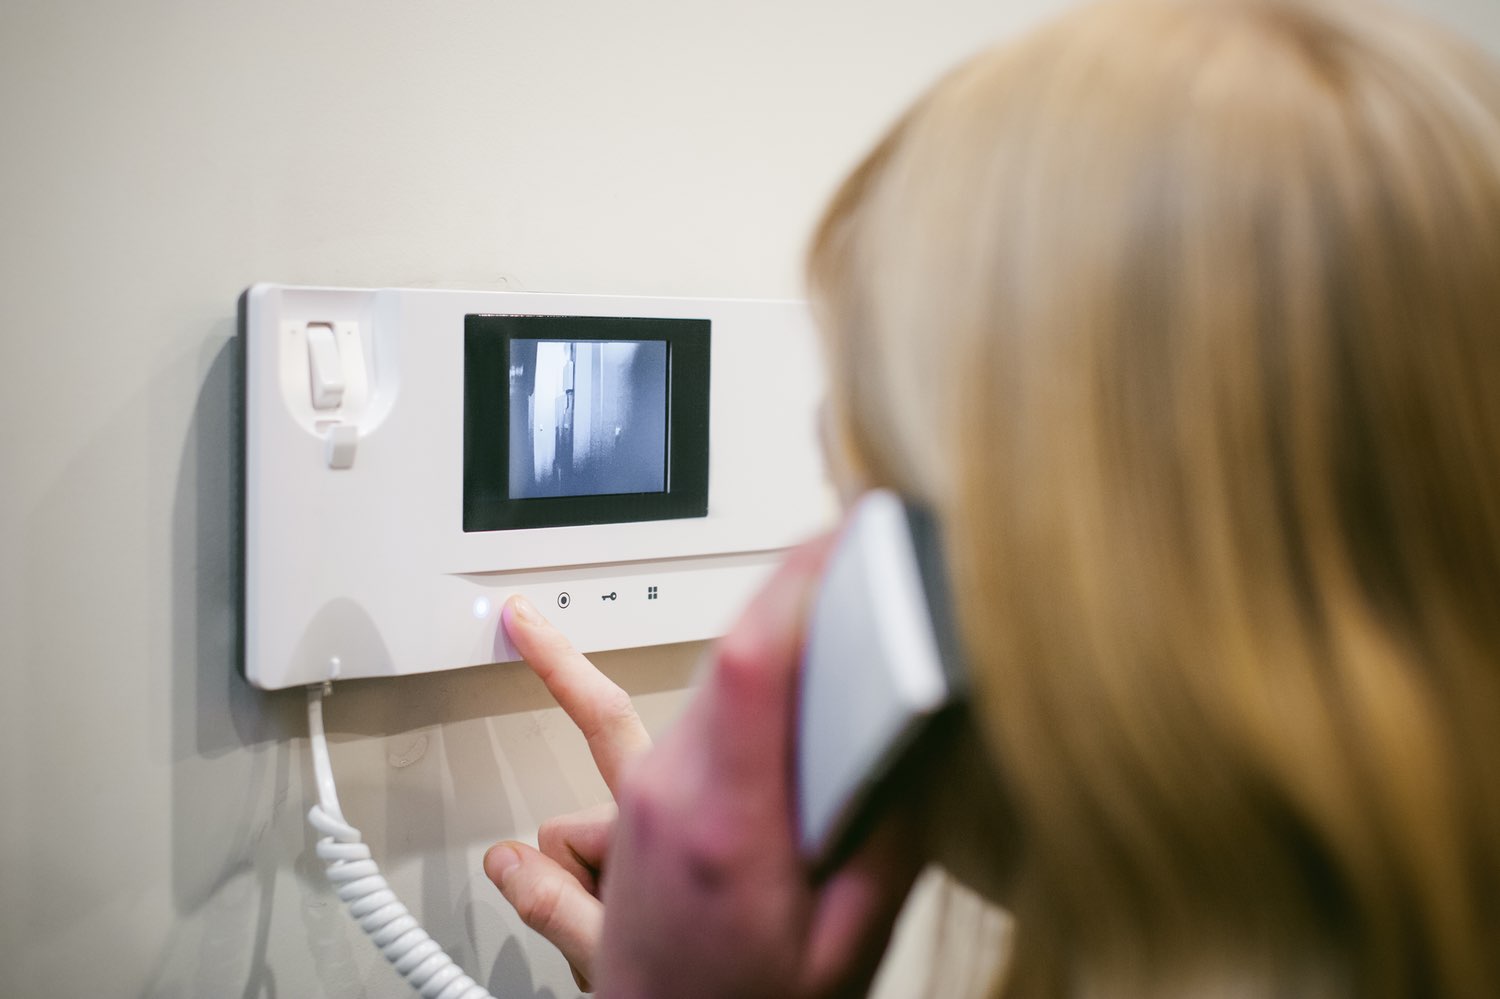 5 Types of Intercom Systems for Home or Office